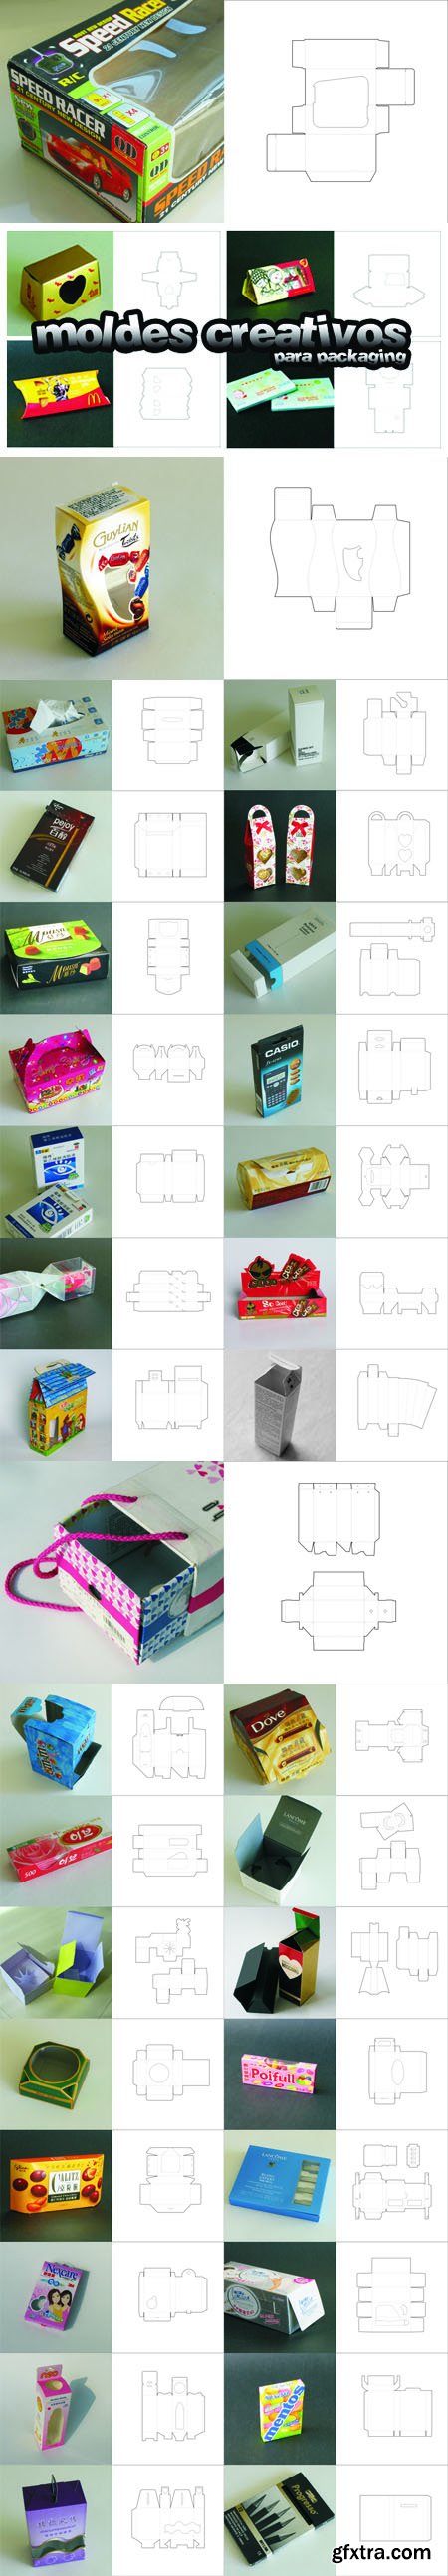 Creative Ideas for Packaging & Advertising 2